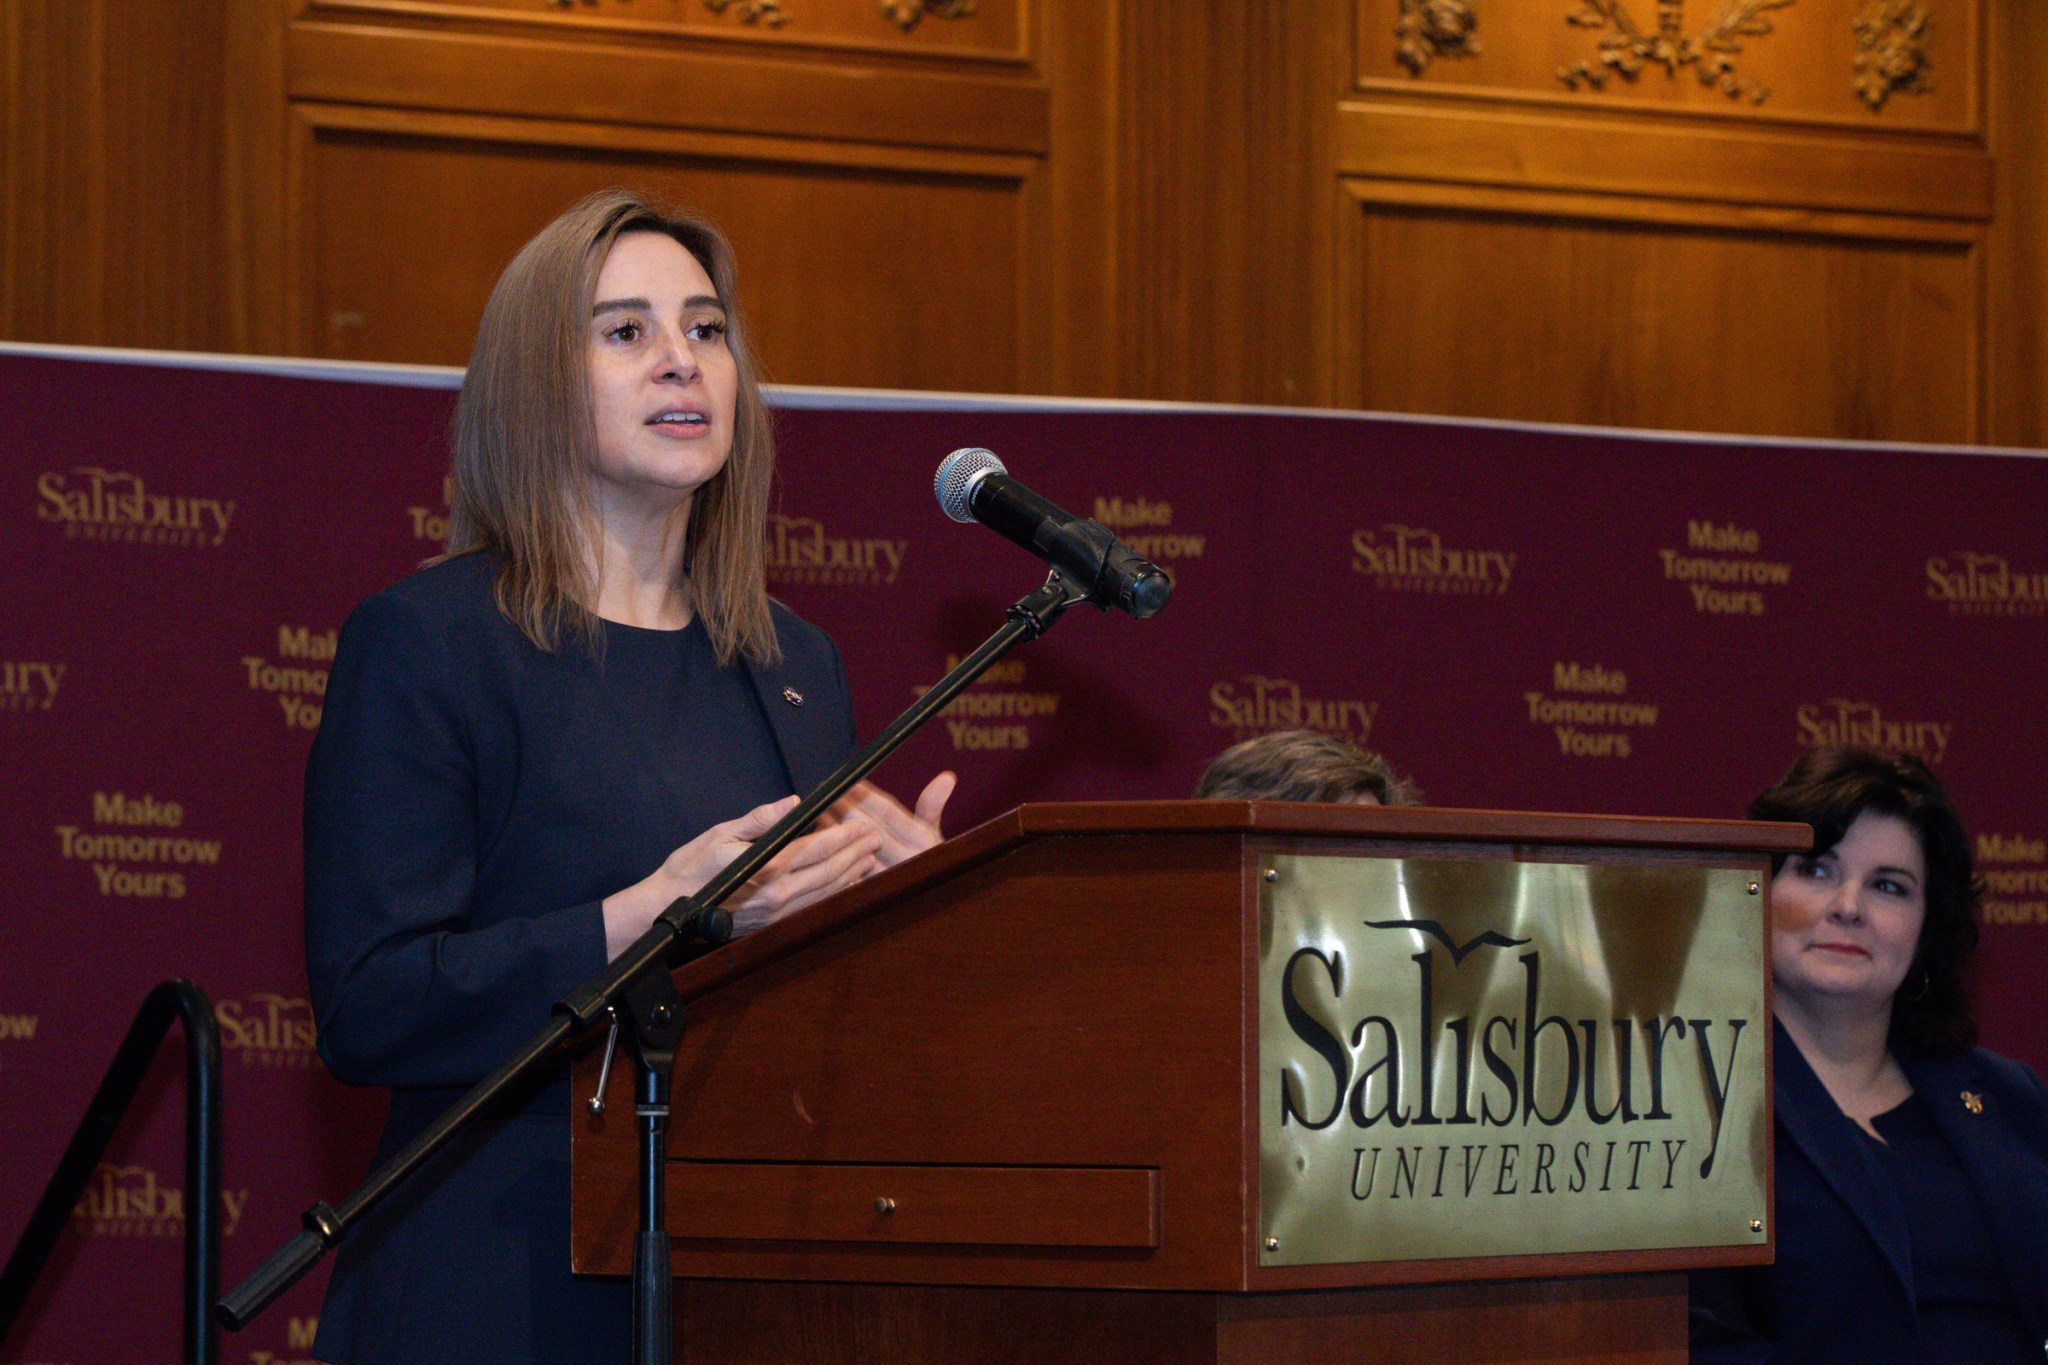 Dr. Makenzie Lystrup speaks at a podium. The words "Salisbury University" on a gold plaque on the front of the podium.